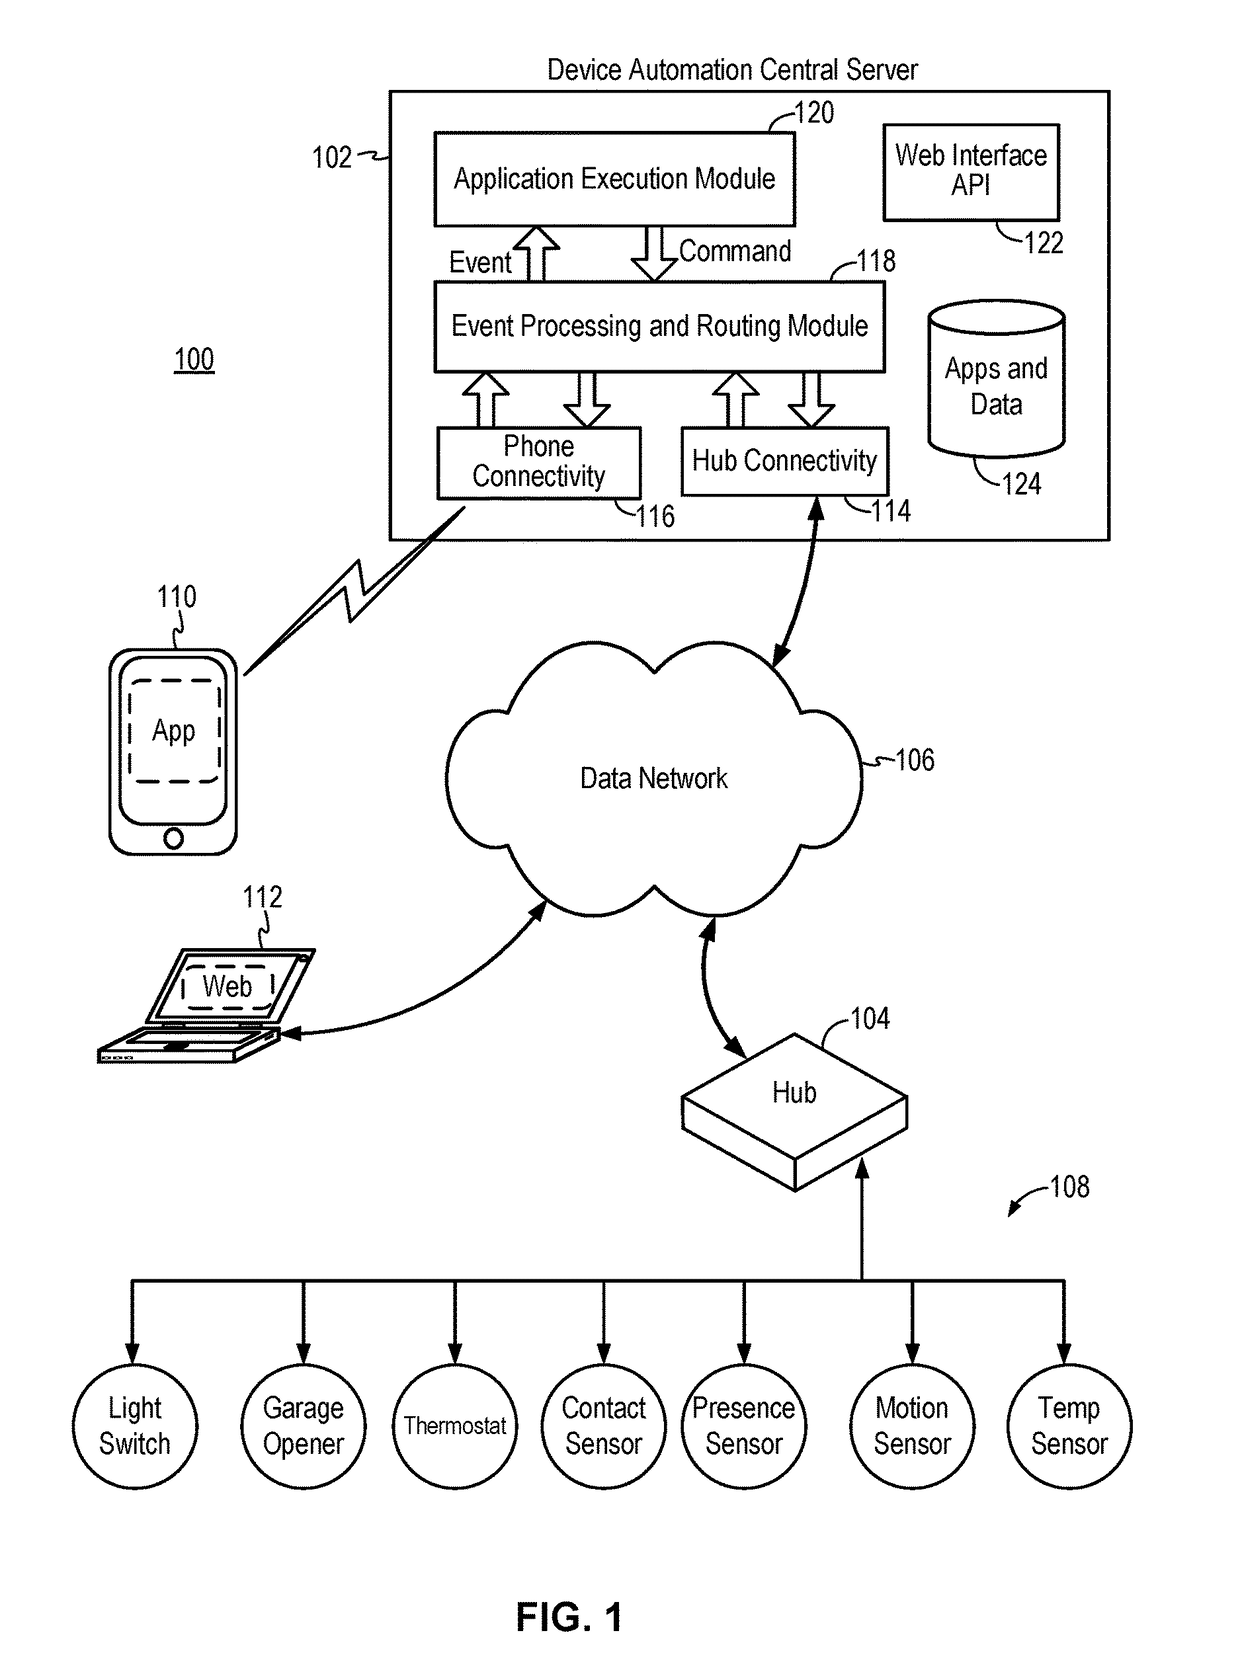 Secured device access in a device automation system